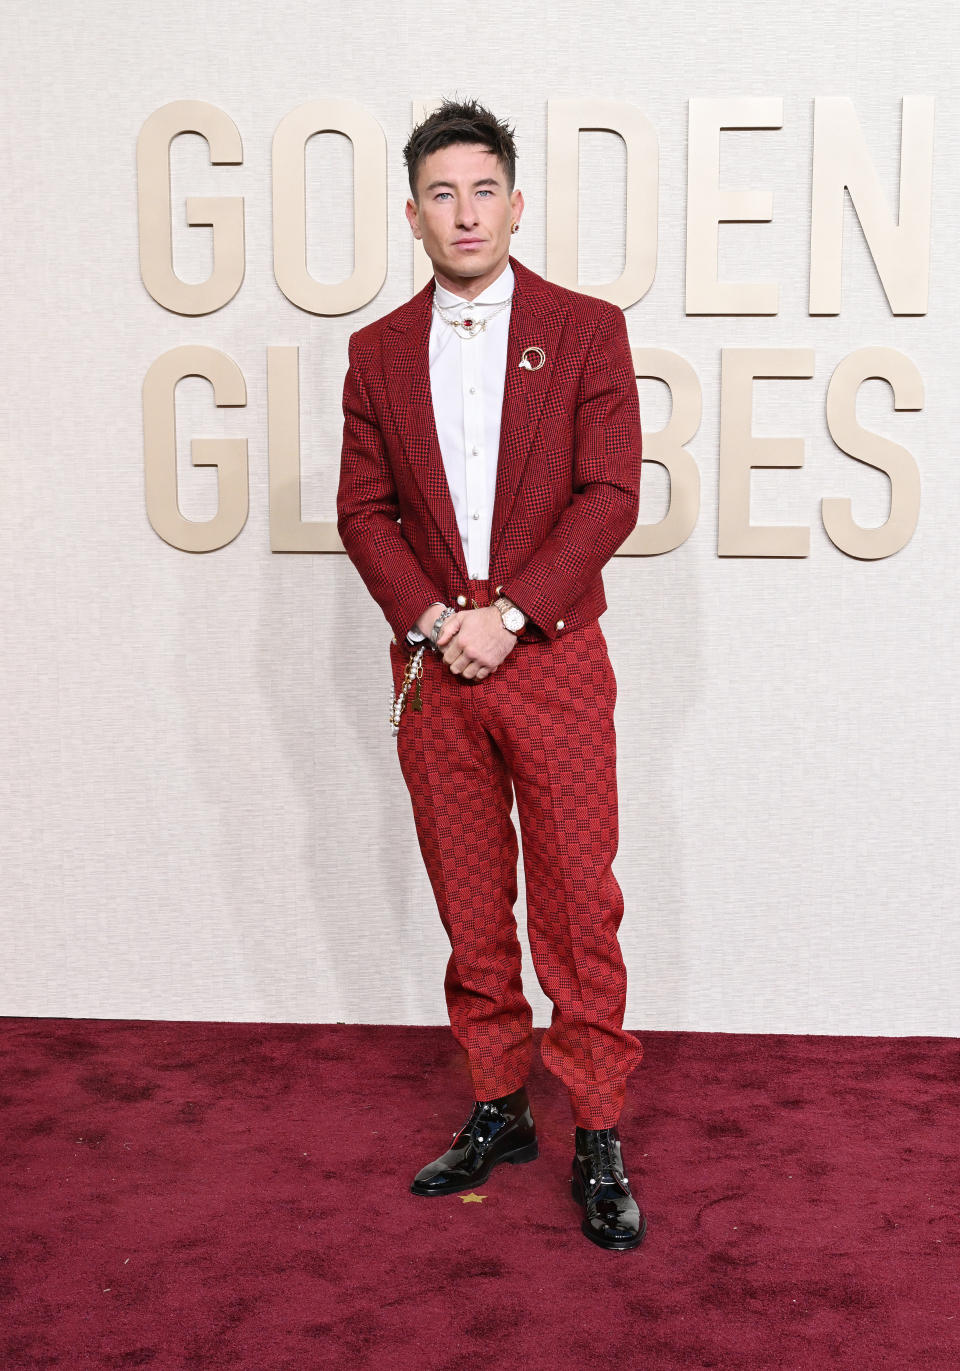 Barry Keoghan at the 81st Golden Globe Awards held at the Beverly Hilton Hotel on January 7, 2024 in Beverly Hills, California. (Photo by Gilbert Flores/Golden Globes 2024/Golden Globes 2024 via Getty Images)